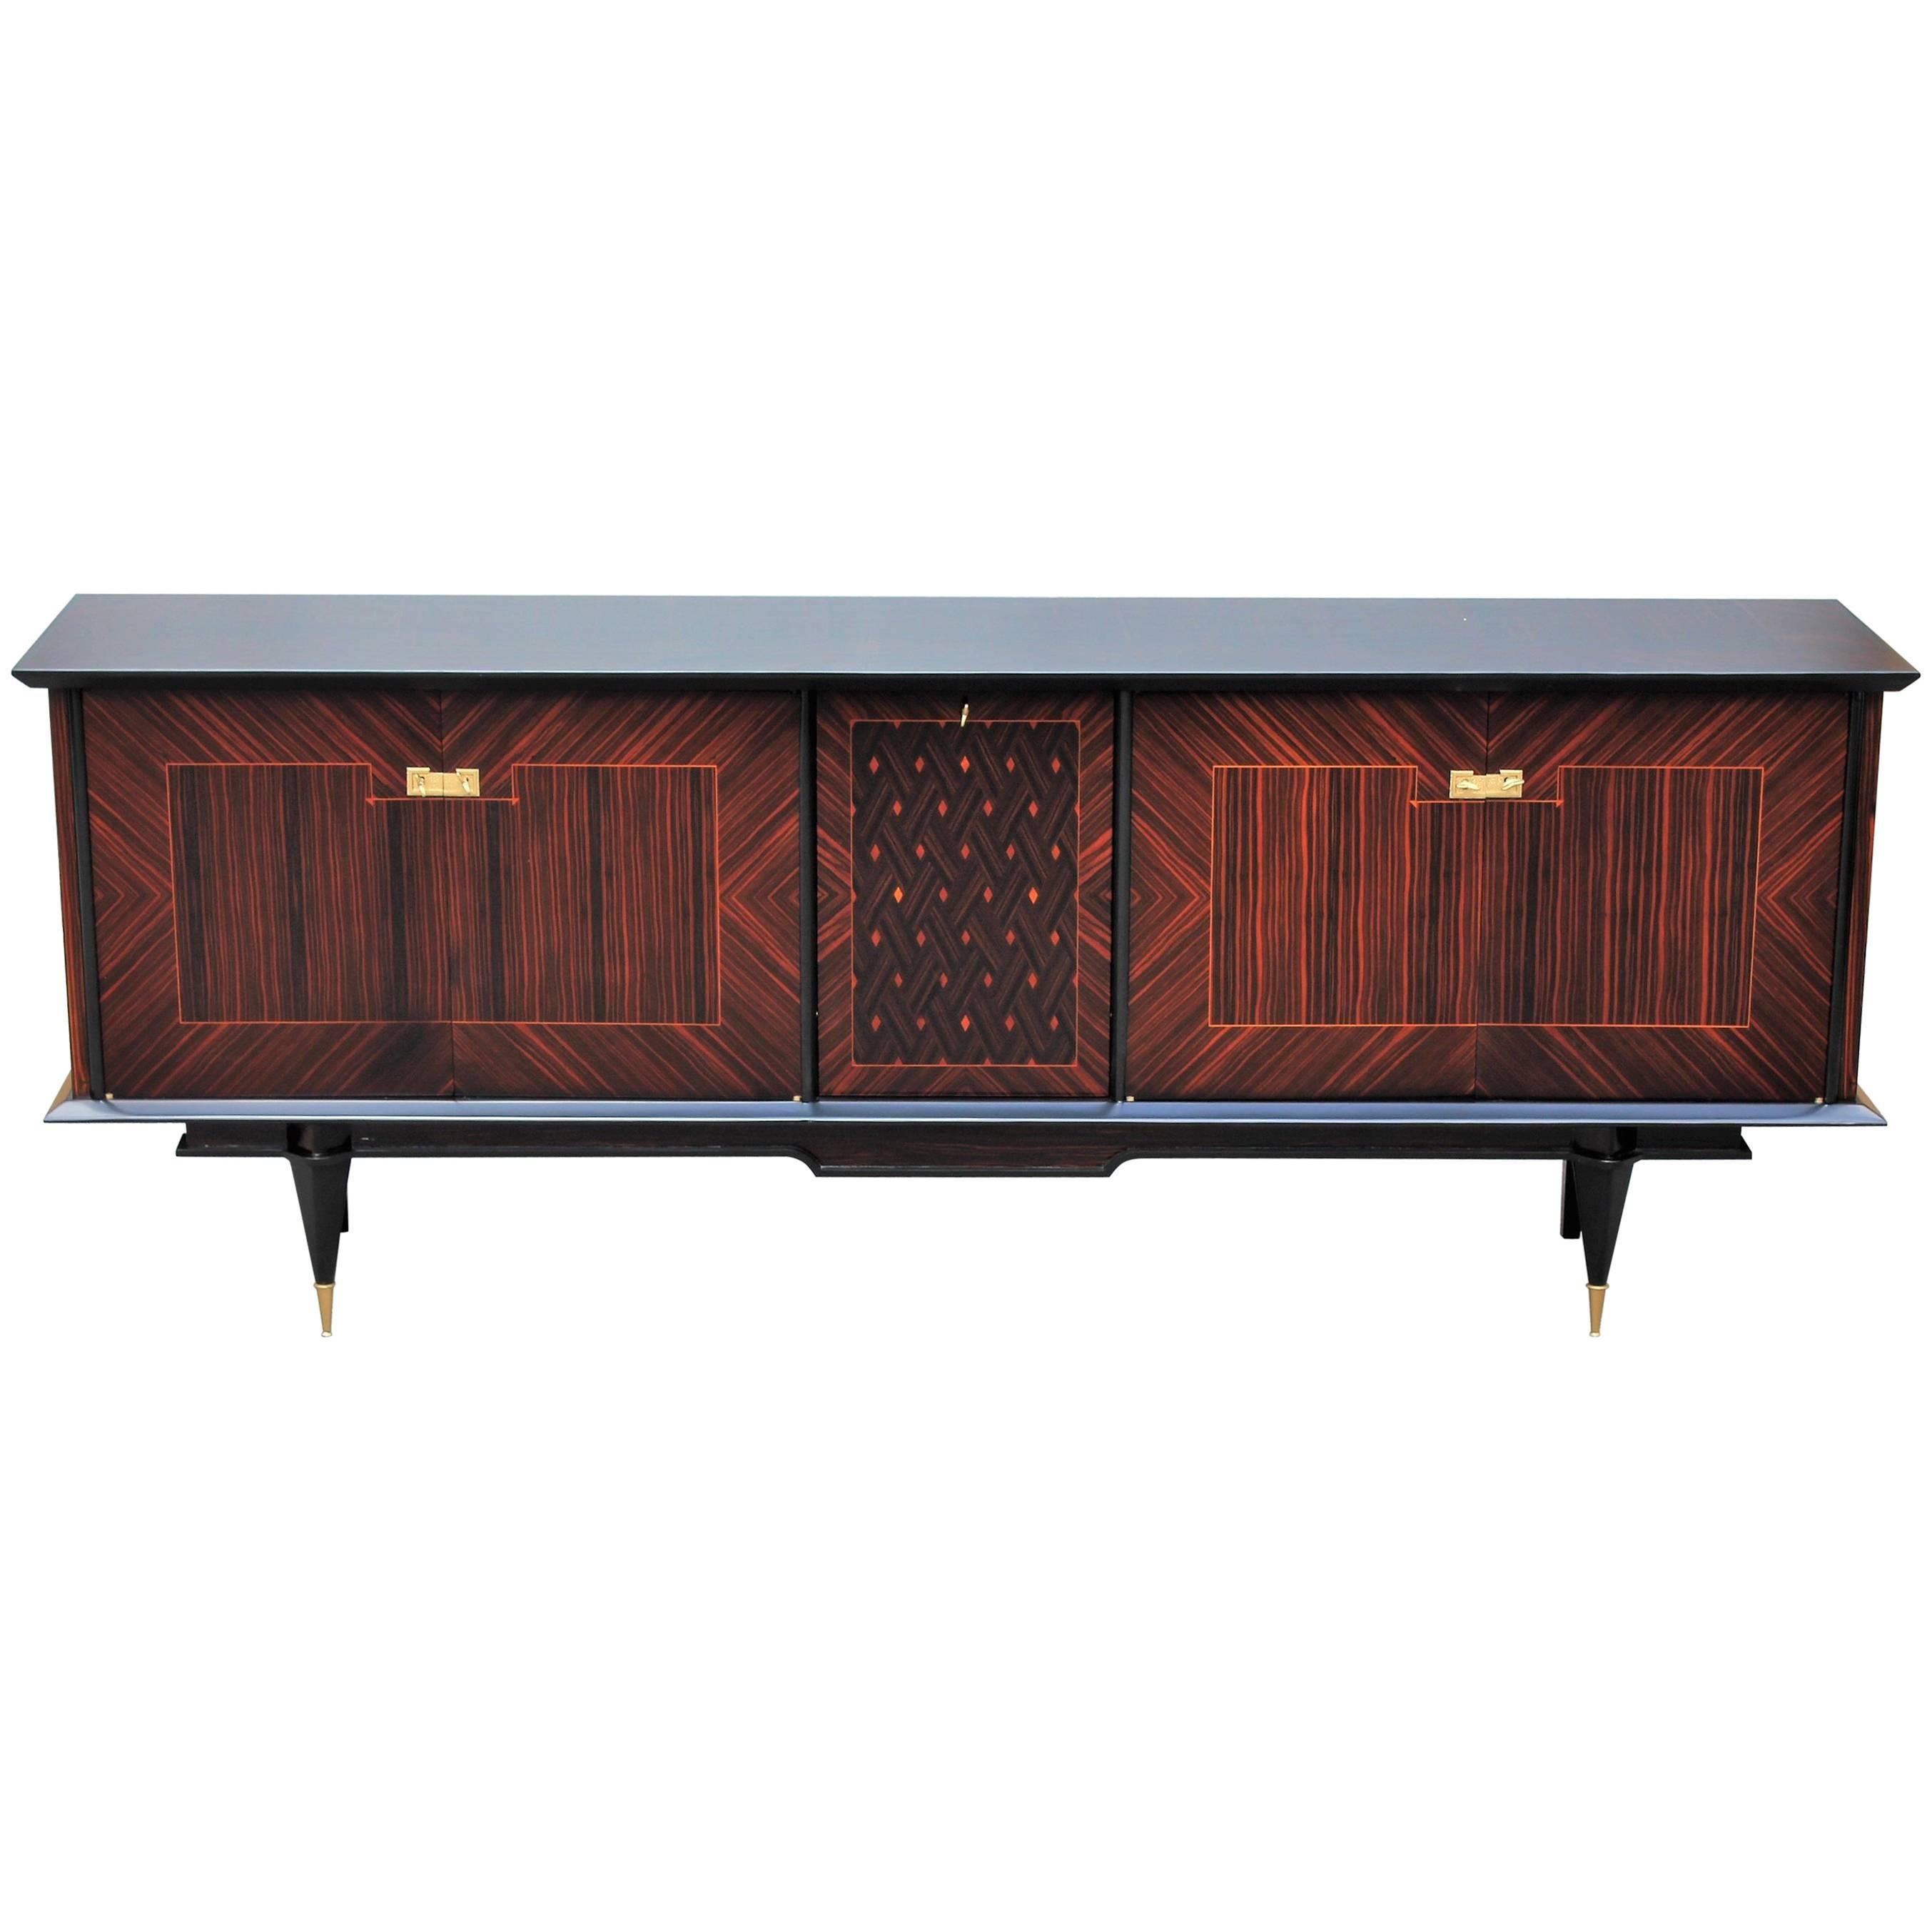 French Art Deco Macassar Sideboard or Buffet with Diamond Centre Inlay, 1940s